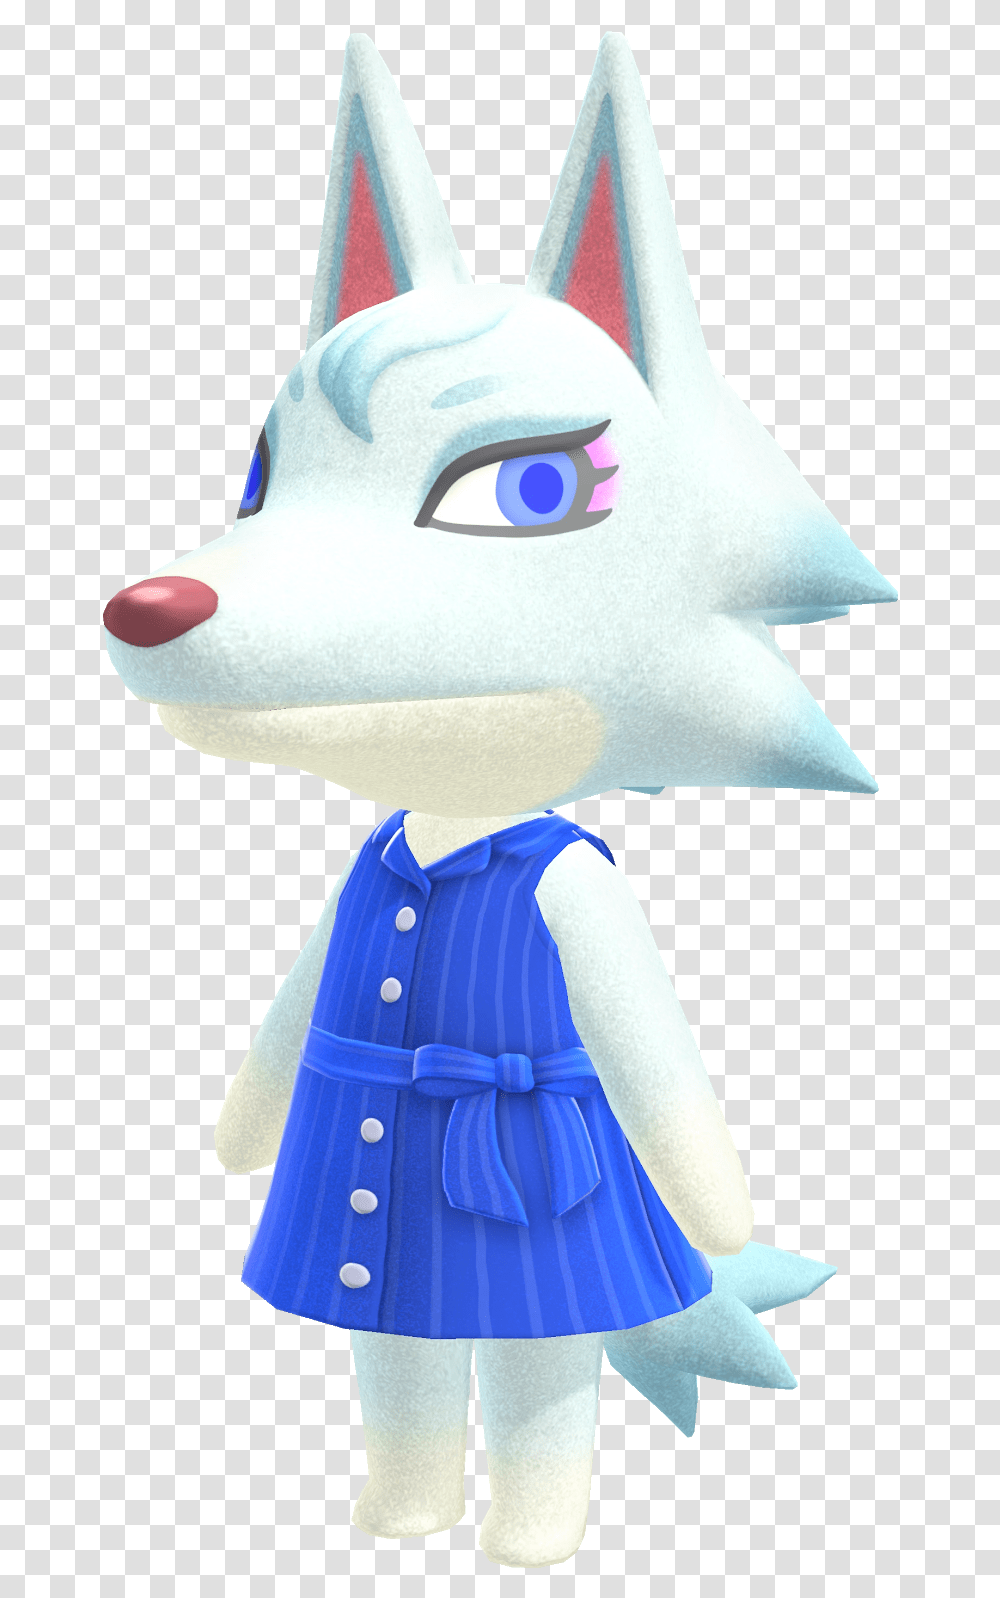 The 10 Best Villagers In Animal Crossing New Horizons Gamepur Animal Crossing New Horizons Lobos, Toy, Doll, Plush, Person Transparent Png